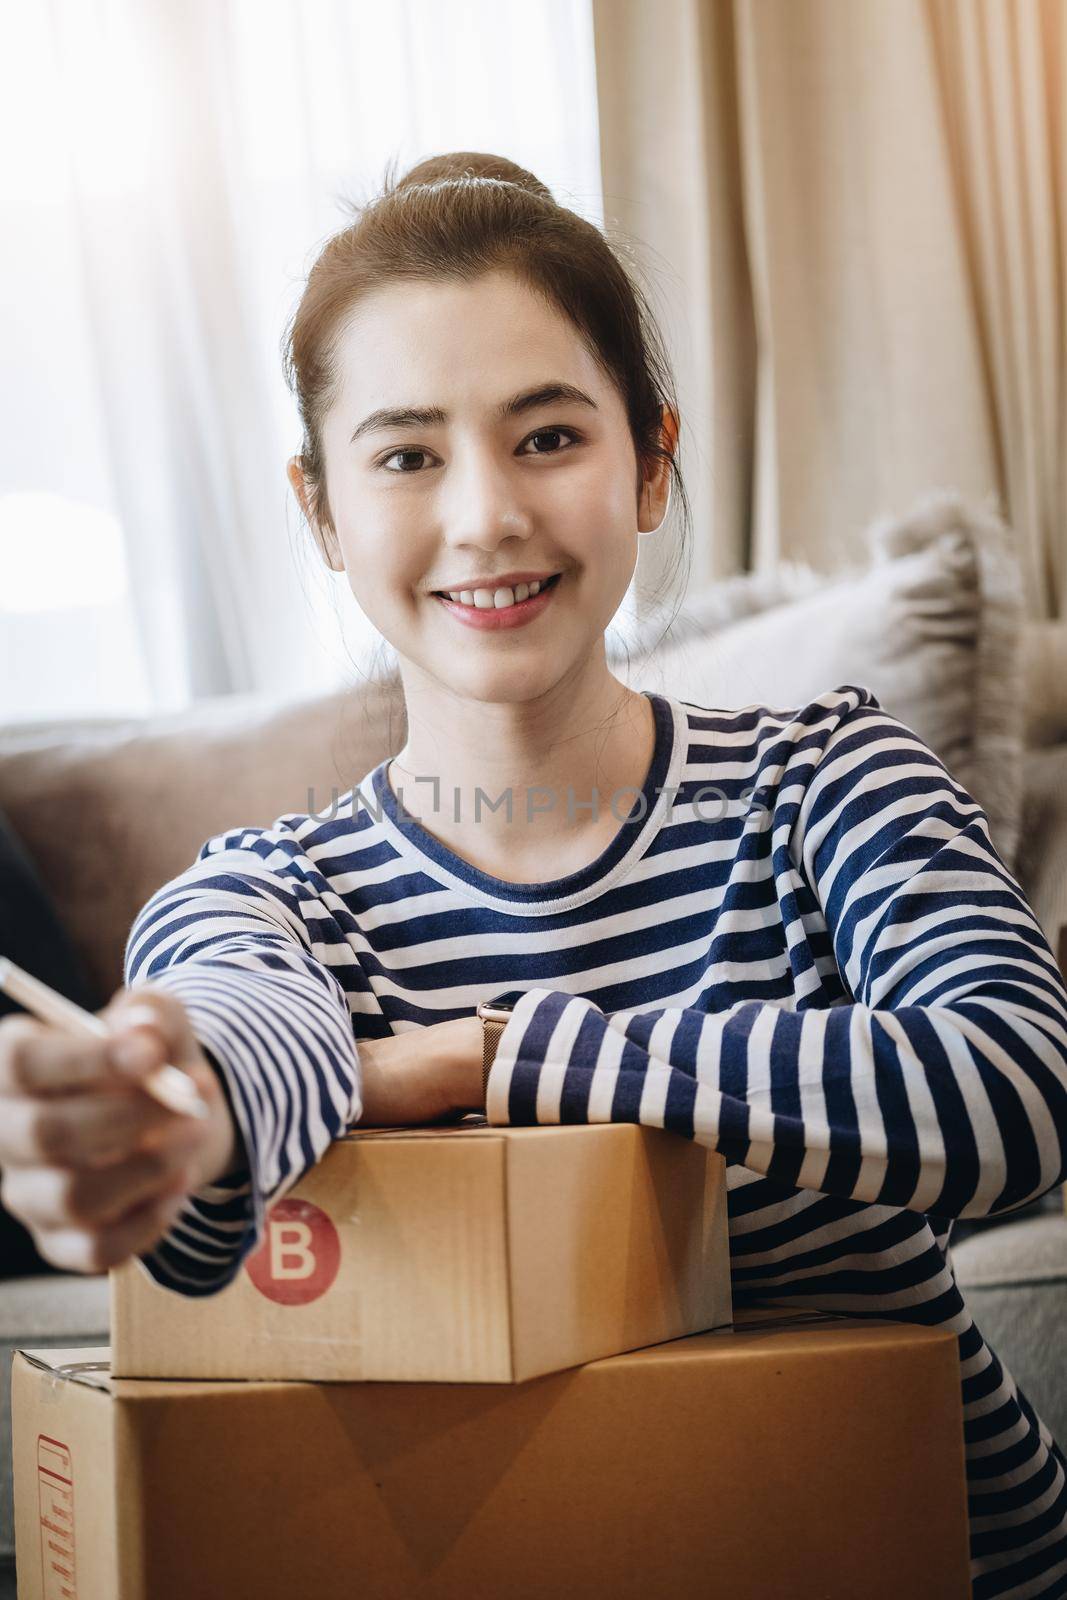 Online selling business idea, beautiful girl smiling happily from selling products online from home. by Manastrong